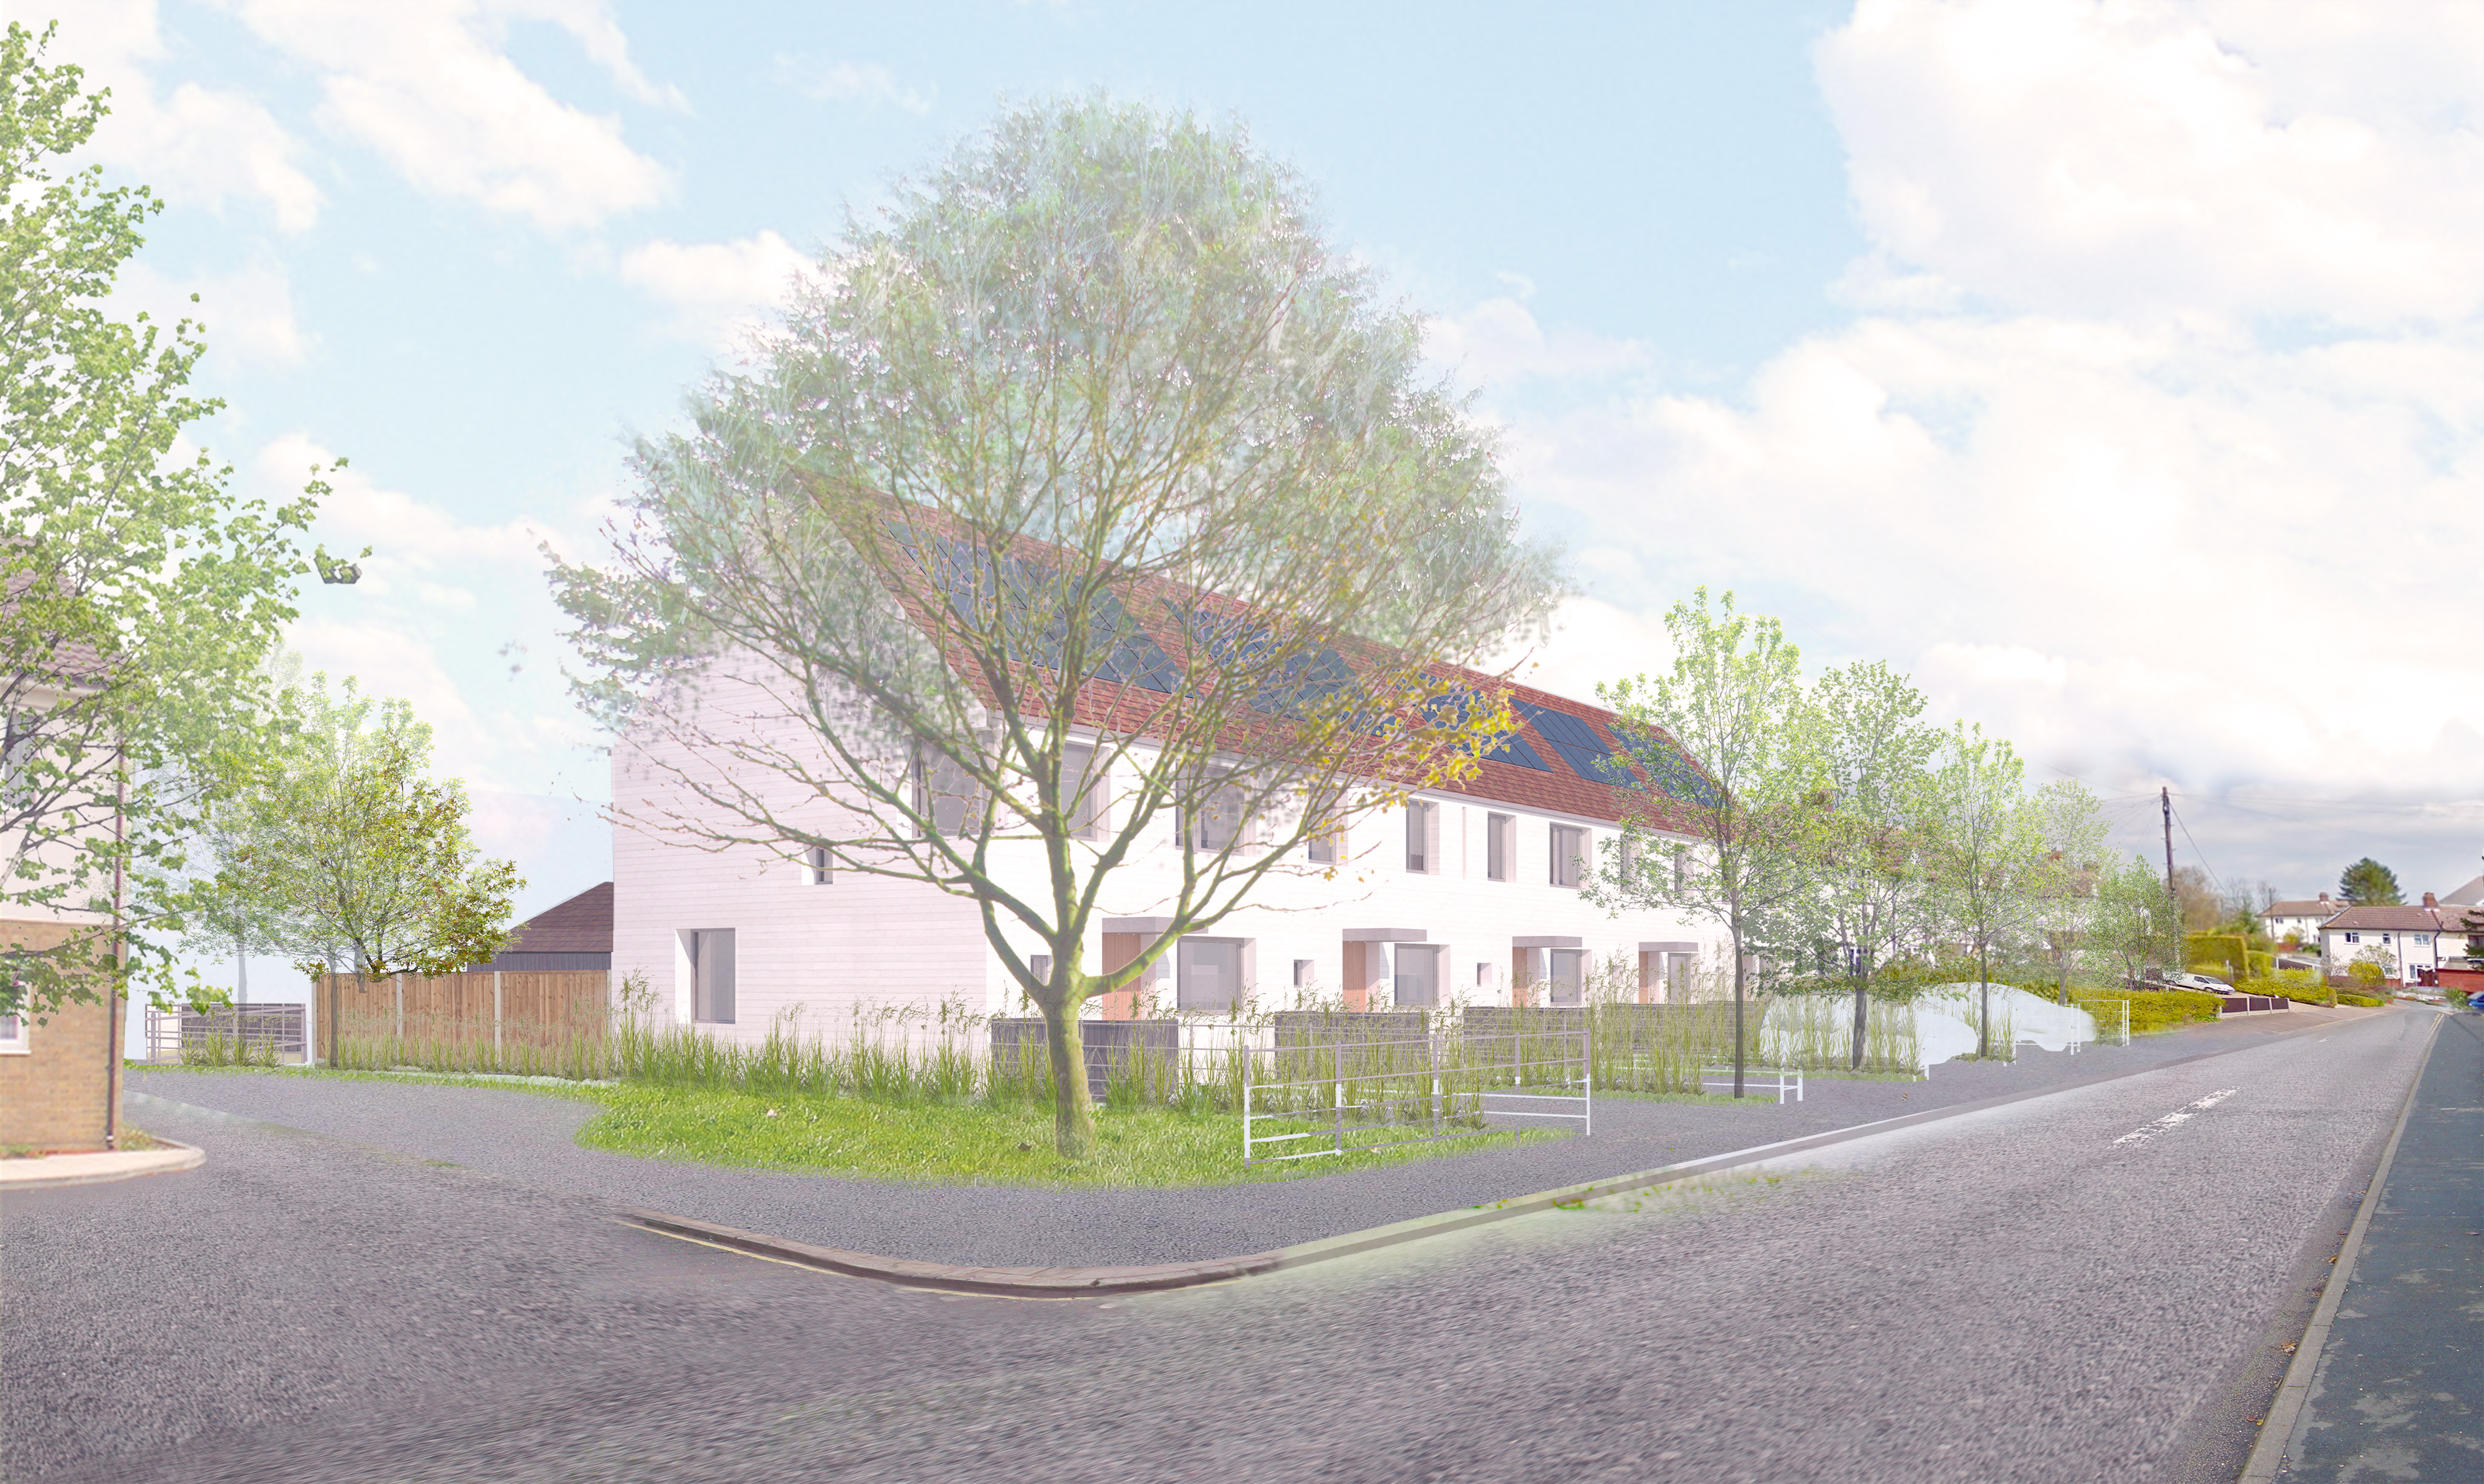 Pilot scheme to deliver seven highly efficient and all-affordable homes in Hertfordshire